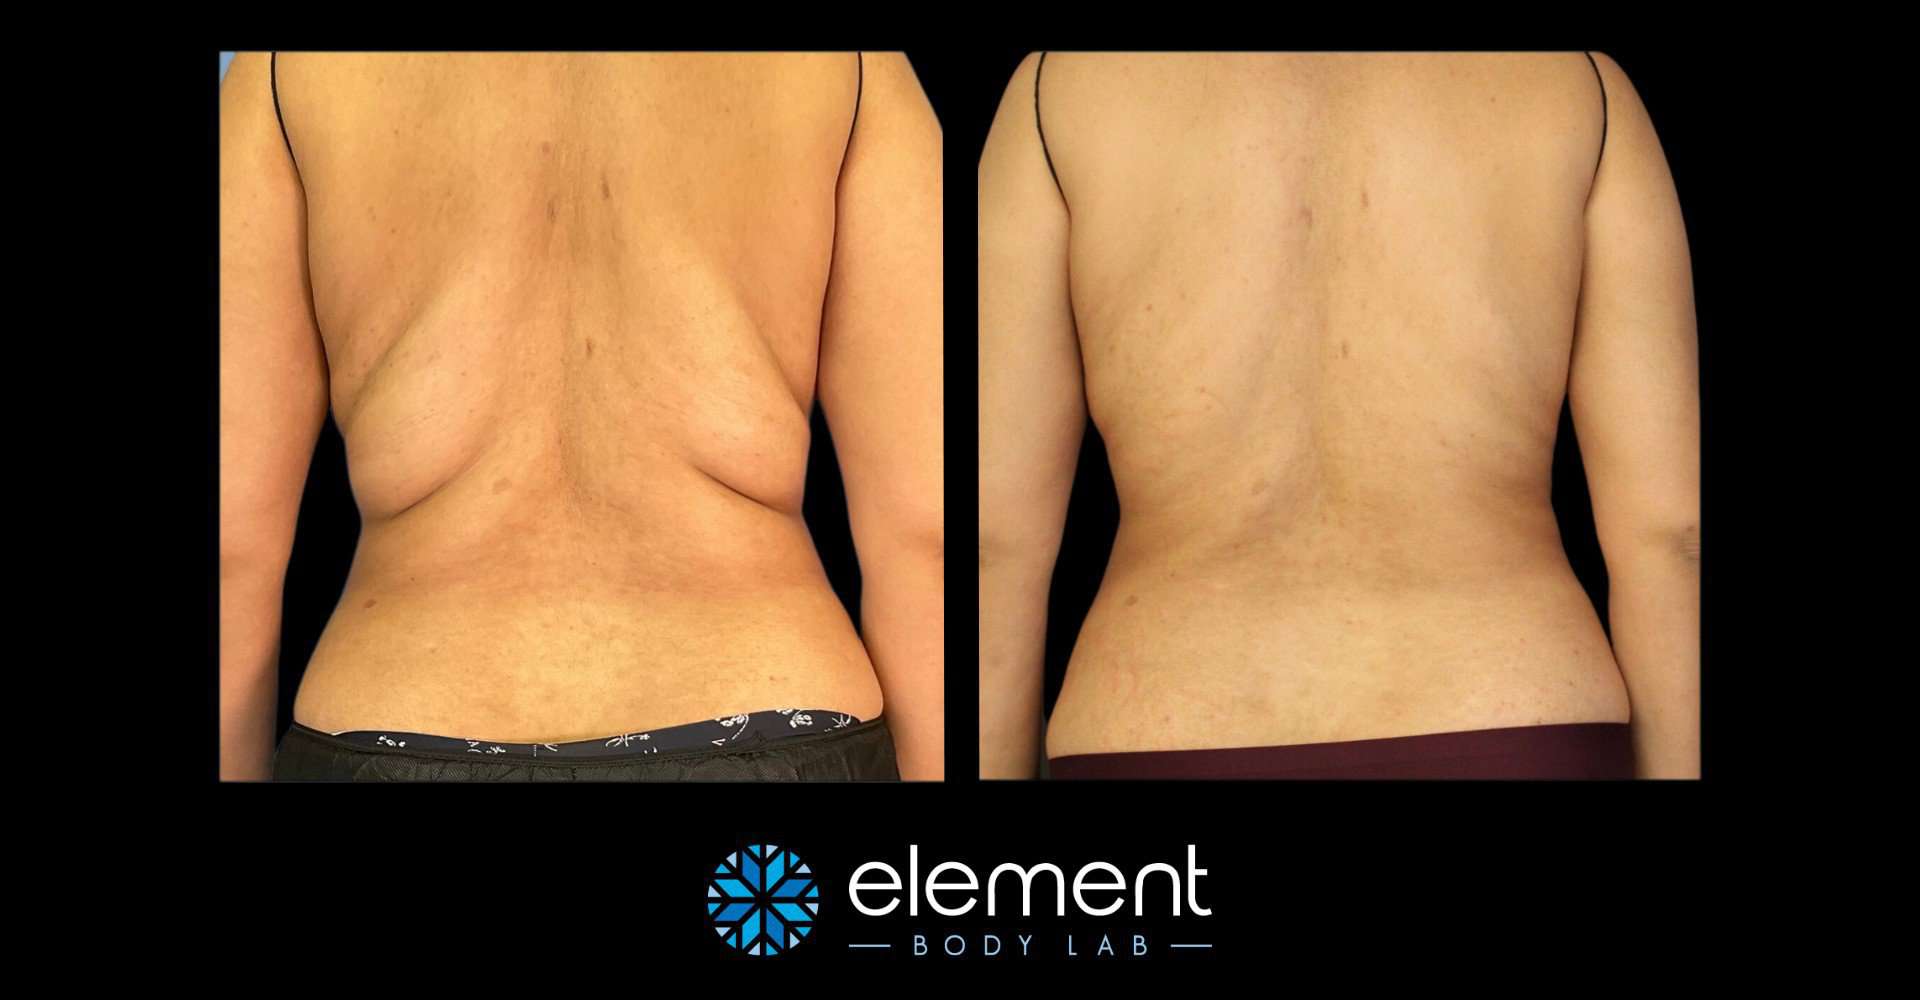 CoolSculpting Before And After Gallery - Element Body Lab